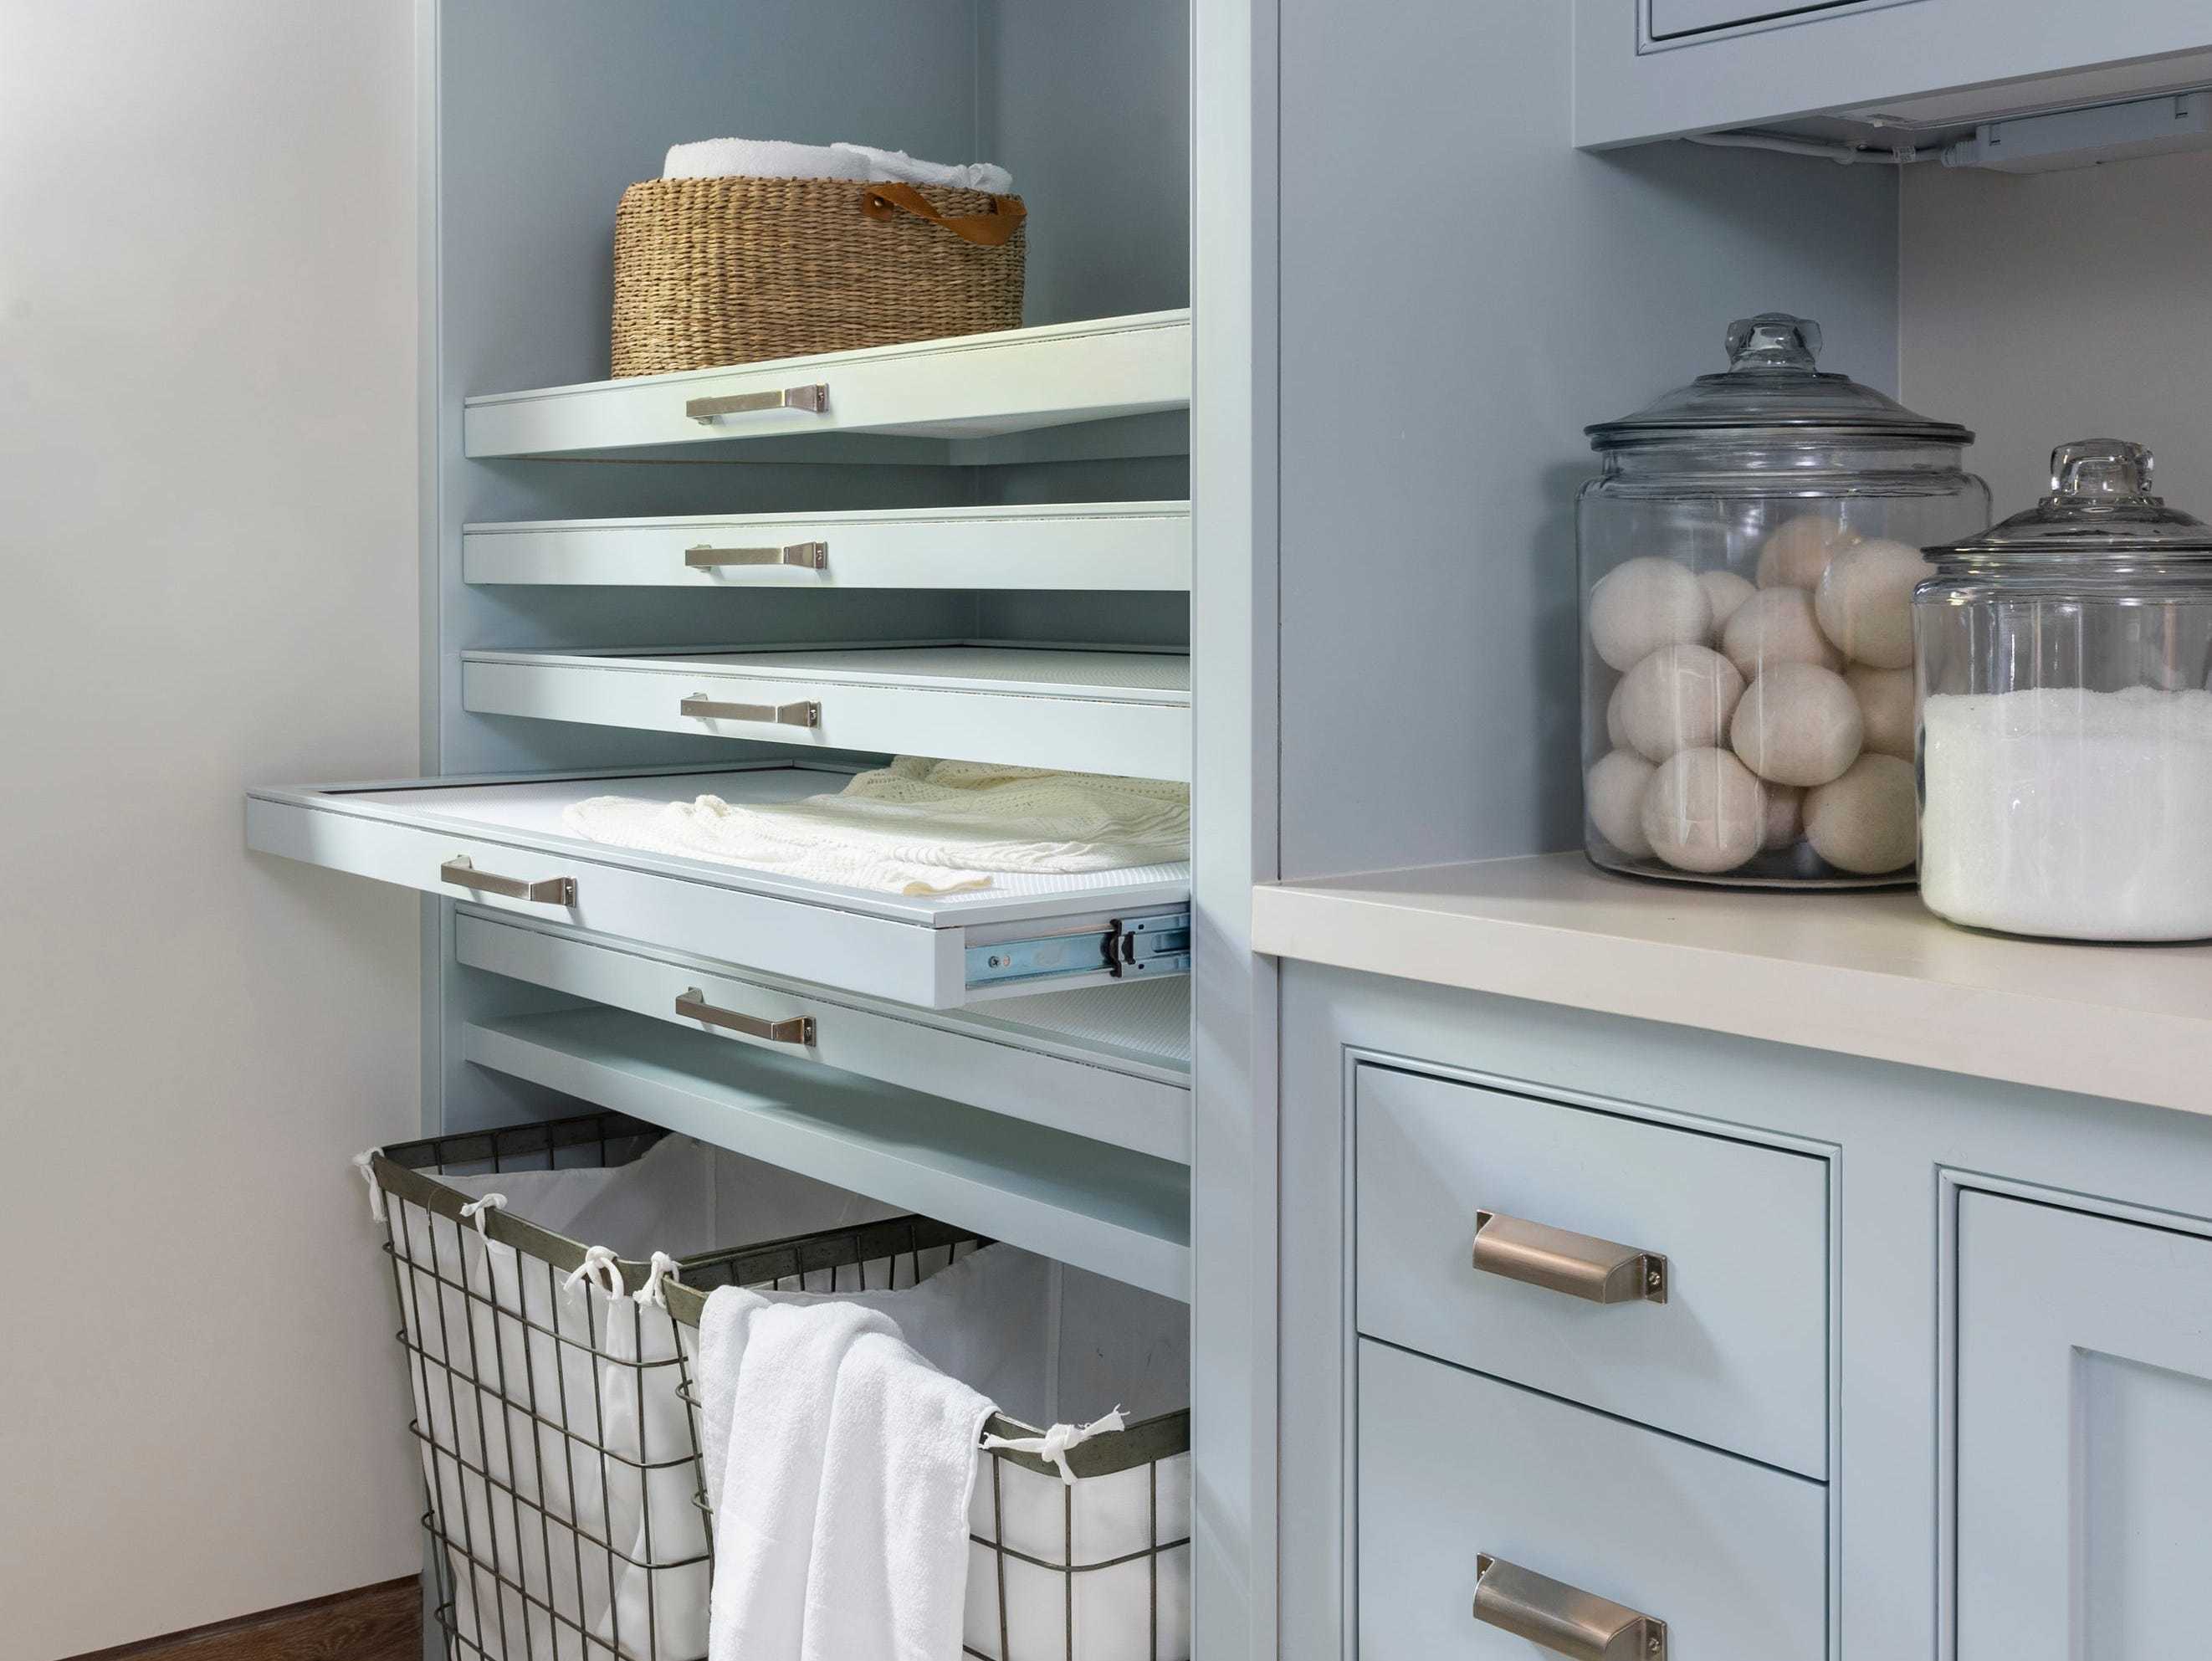 Light blue cabinets and wire baskets.